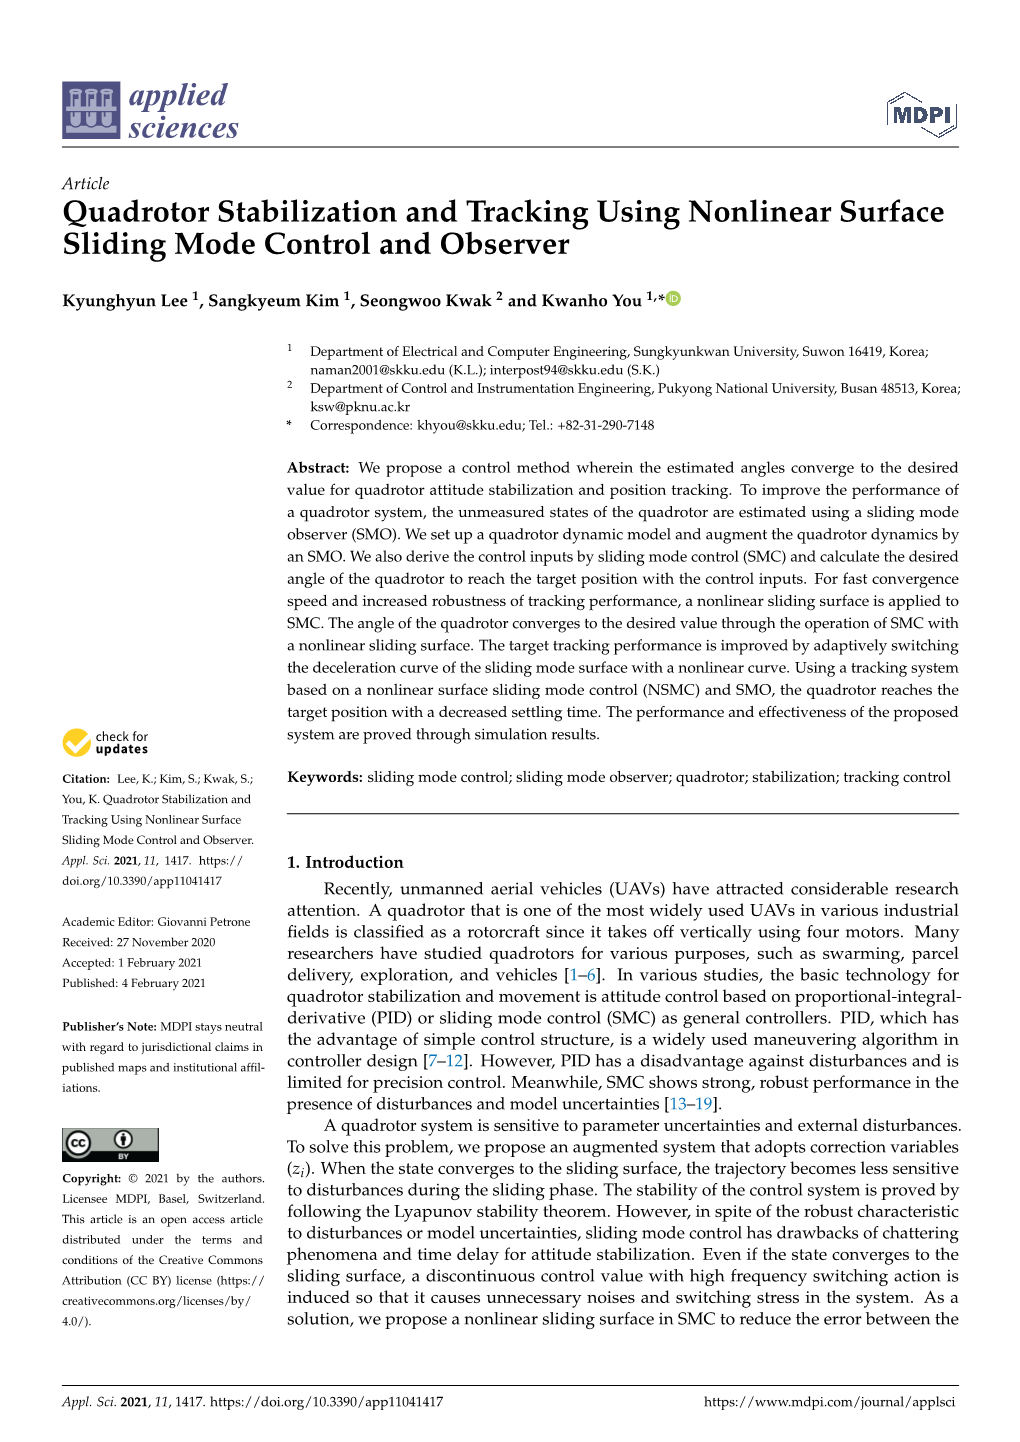 Quadrotor Stabilization and Tracking Using Nonlinear Surface Sliding Mode Control and Observer